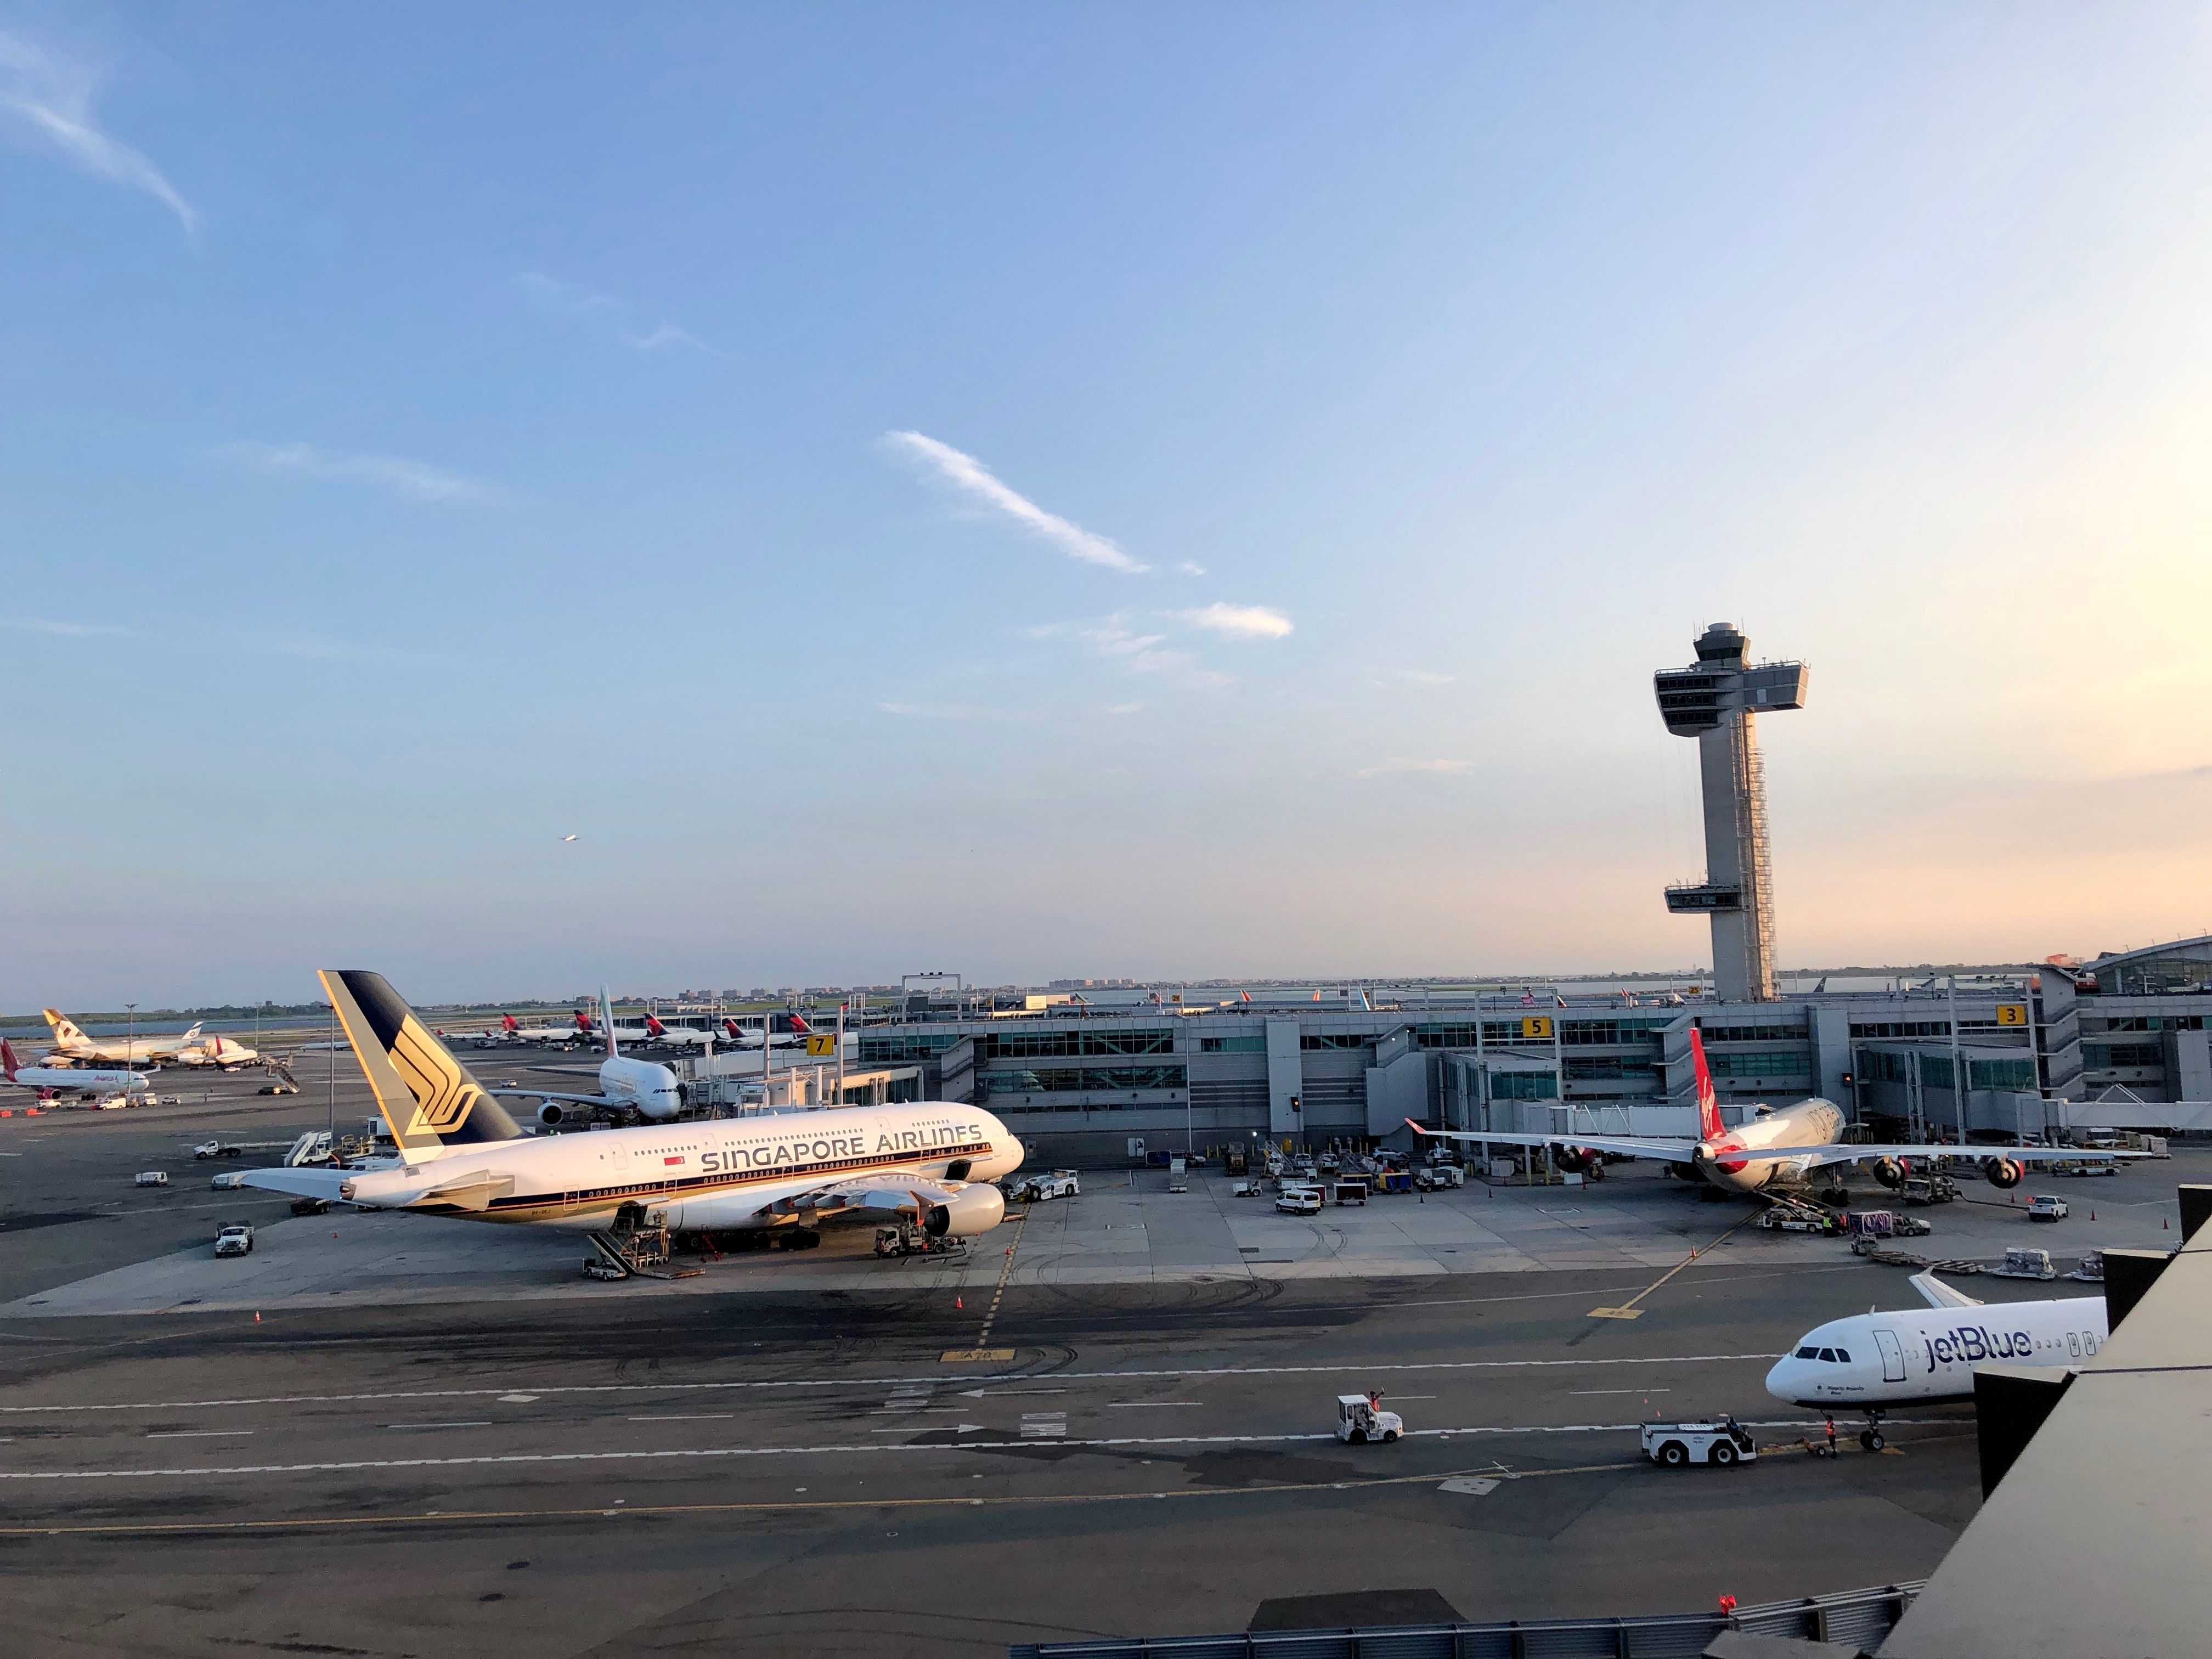 A panoramic view of New York JFK Airport's apron, with a Singapore Airlines aircraft being loaded.